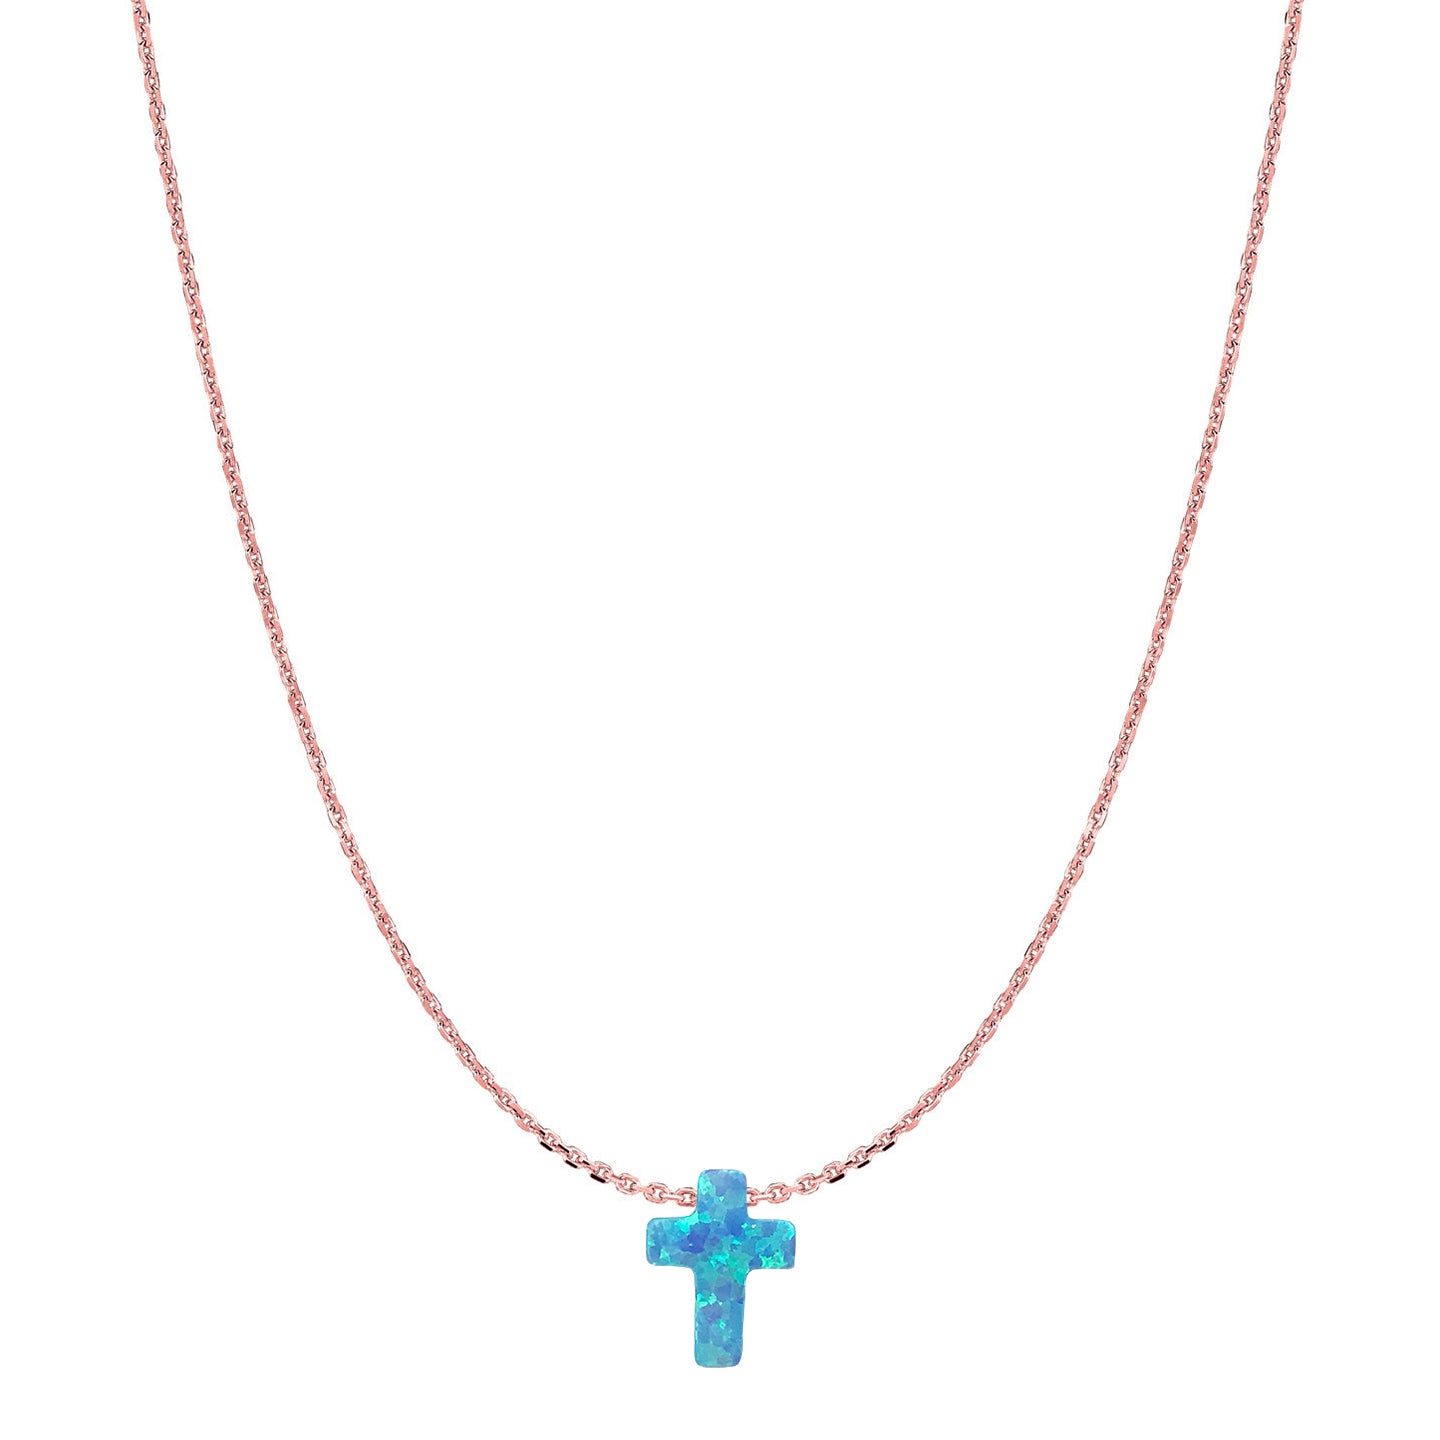 Blue Opal Cross Necklace rose gold Chain Byou Designs